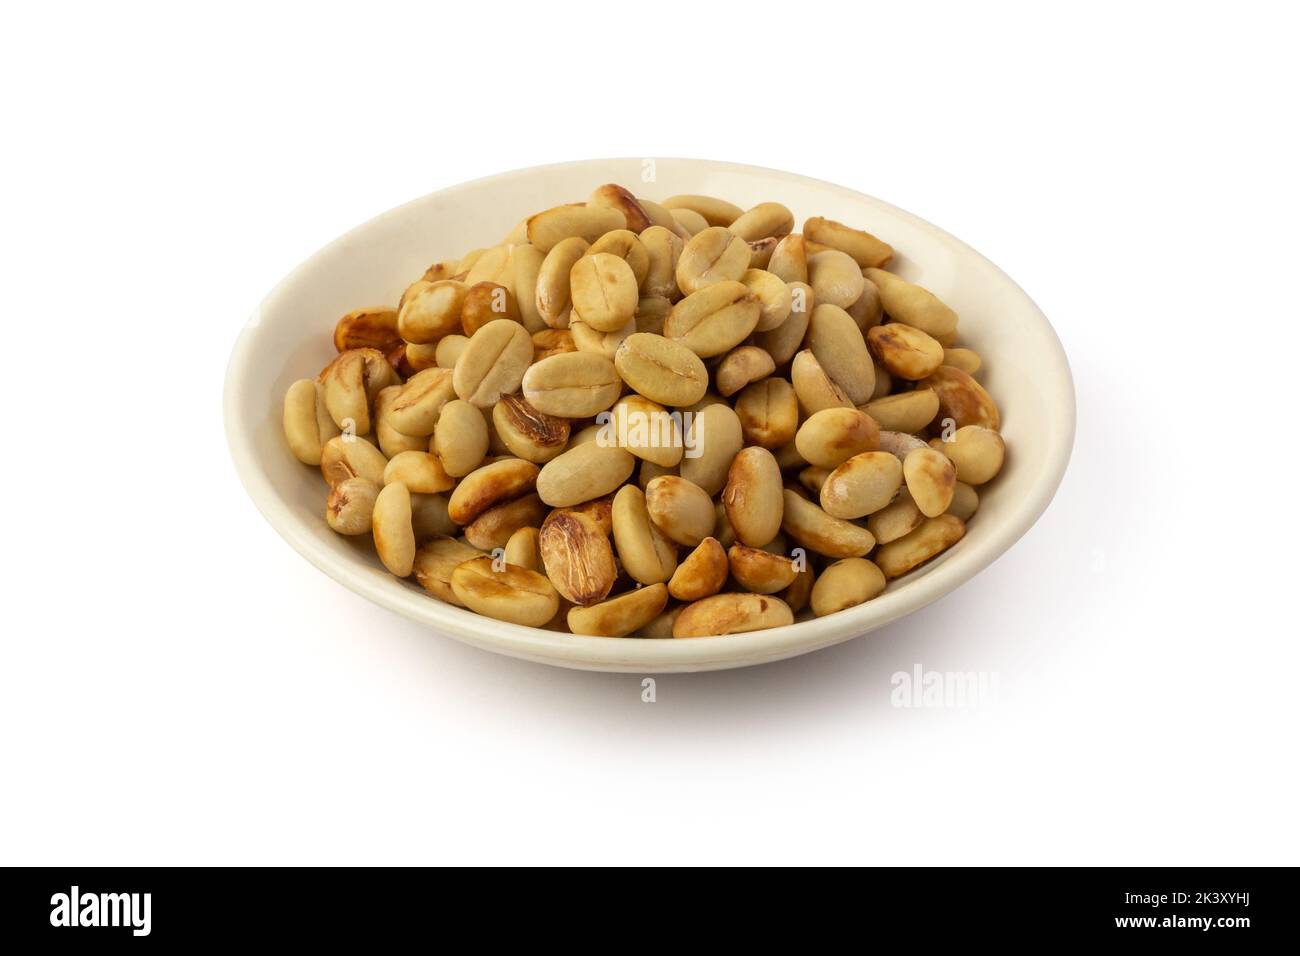 dried coffee beans with hull or parchment skin on white plate, coffea arabica, pulp and skin or flesh of the coffee cherry is removed from the beans Stock Photo